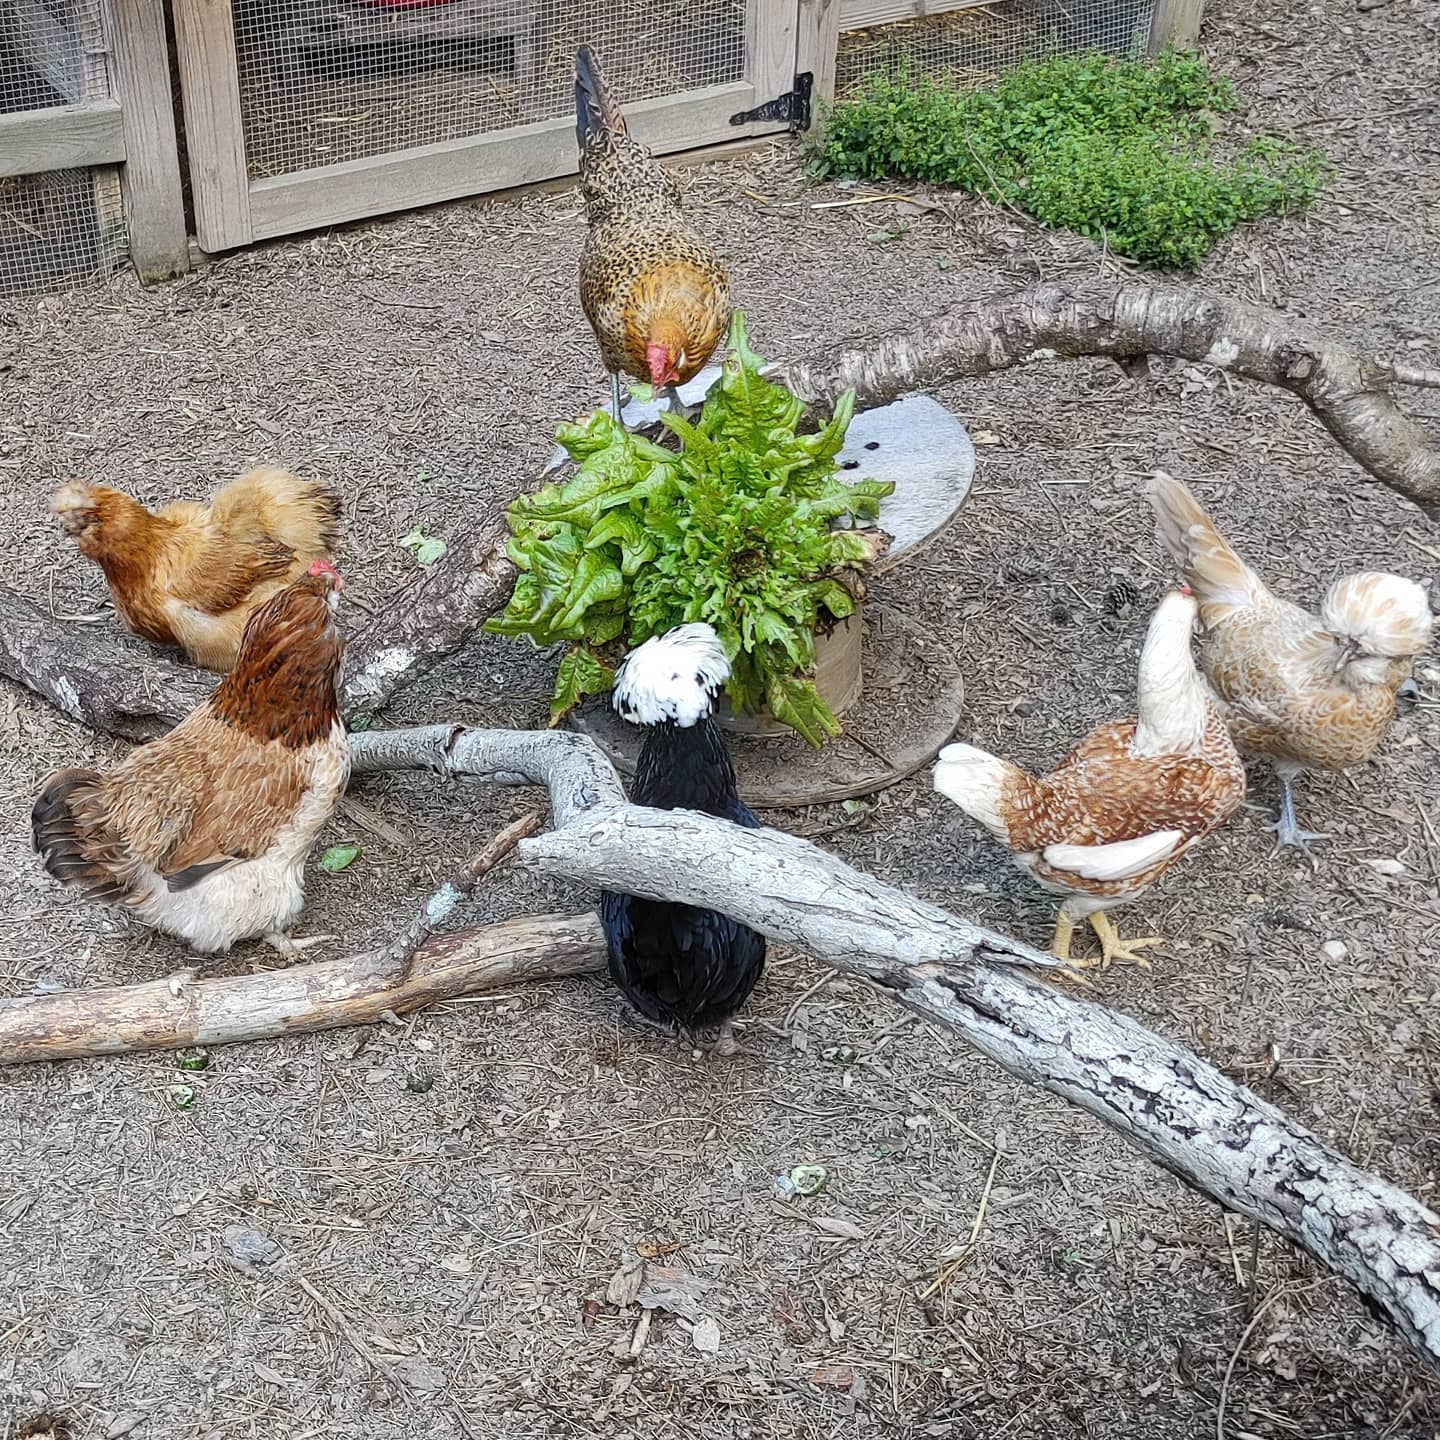 Breakfast bar! The lettuce is bolting in the heat (it's going to be 90° F today) so I'm sharing with the flock. They completely consumed this head in about an hour. That's a lot if tiny beak sized bites!